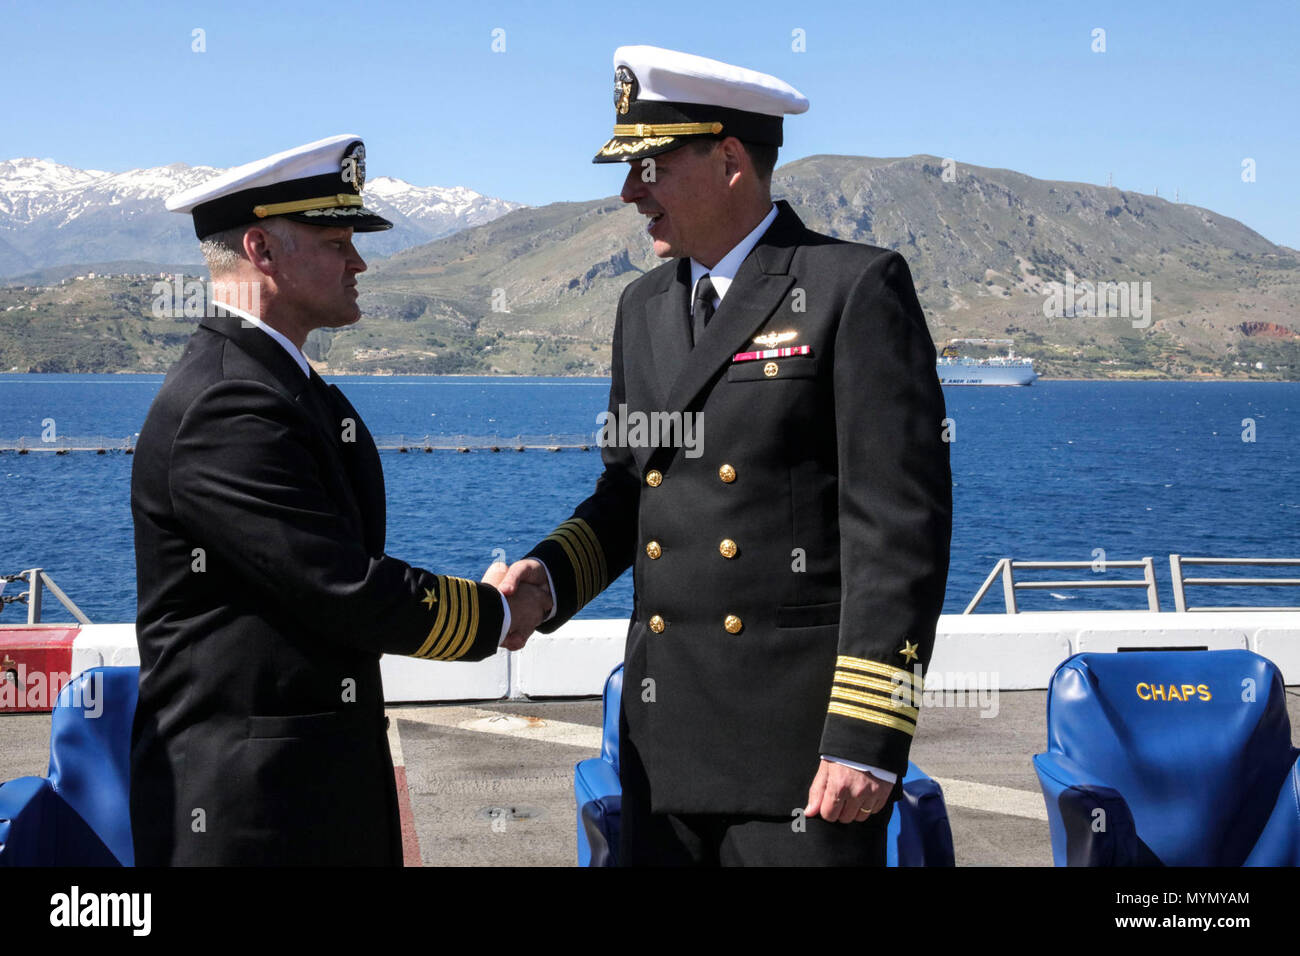 BAY, Greece (May 5, 2017) Capt. Randall Peck , left, congratulates Capt.  Maximilian Clark after being relieved as commanding officer of the San  Antonio-class amphibious transport dock ship USS Mesa Verde's (LPD